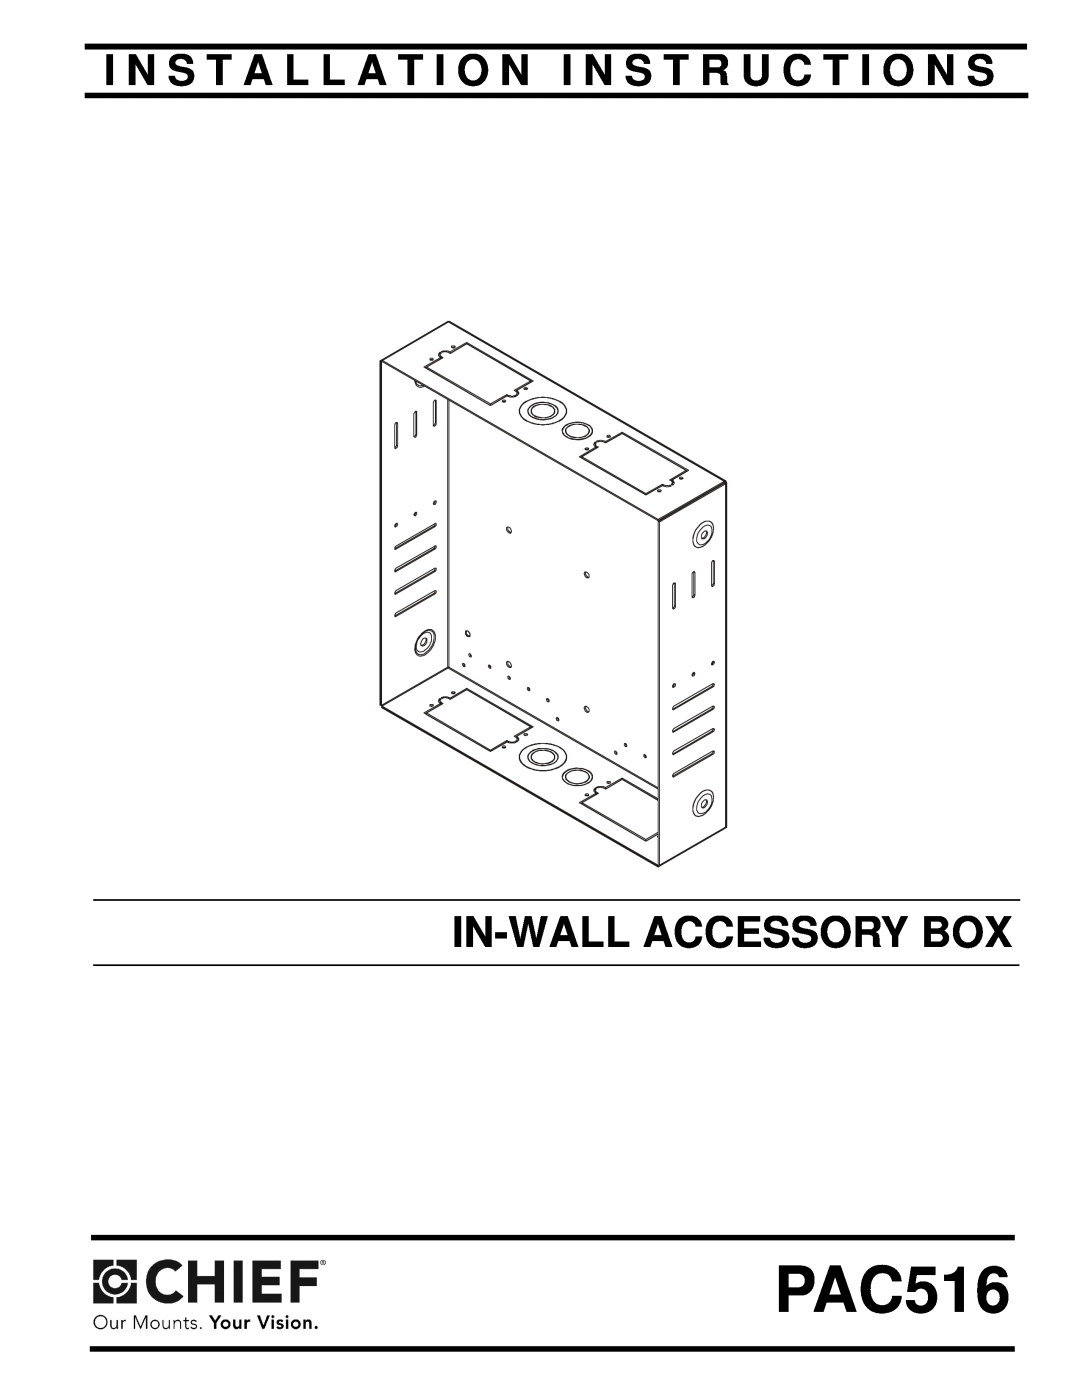 Chief Manufacturing PAC516 installation instructions I N S T A L L A T I O N I N S T R U C T I O N S In-Wall Accessory Box 